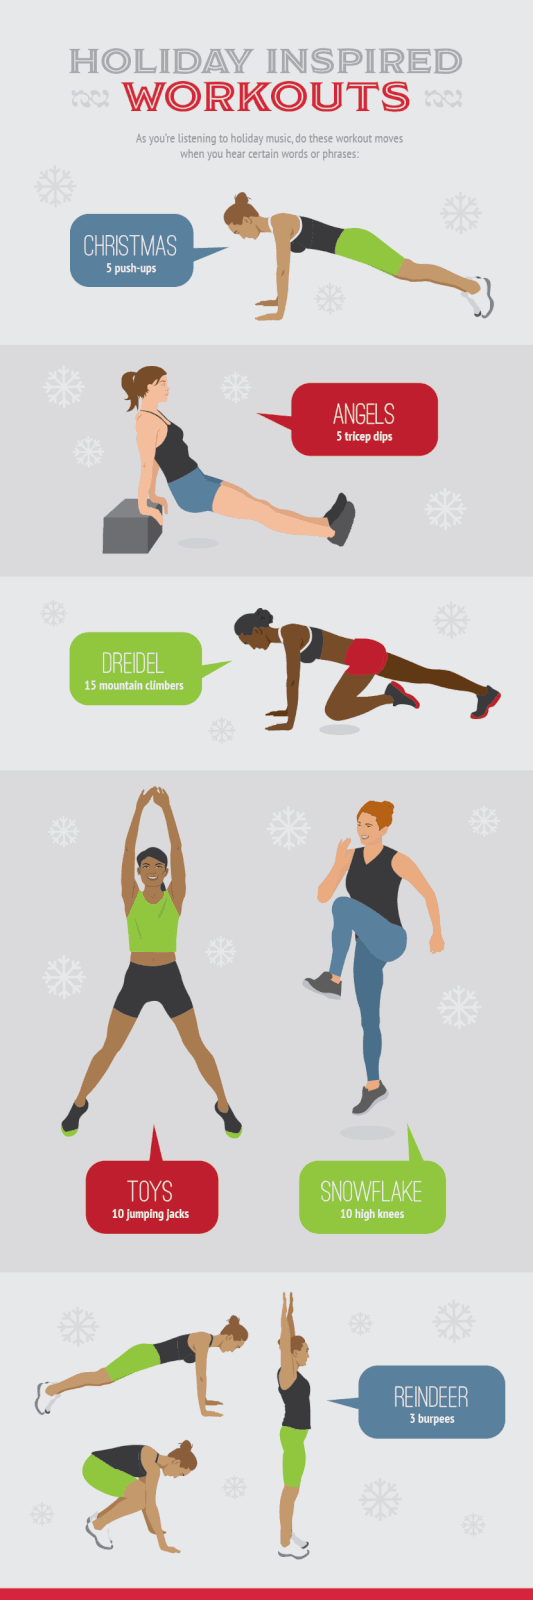 holiday-health-guide-workouts-1